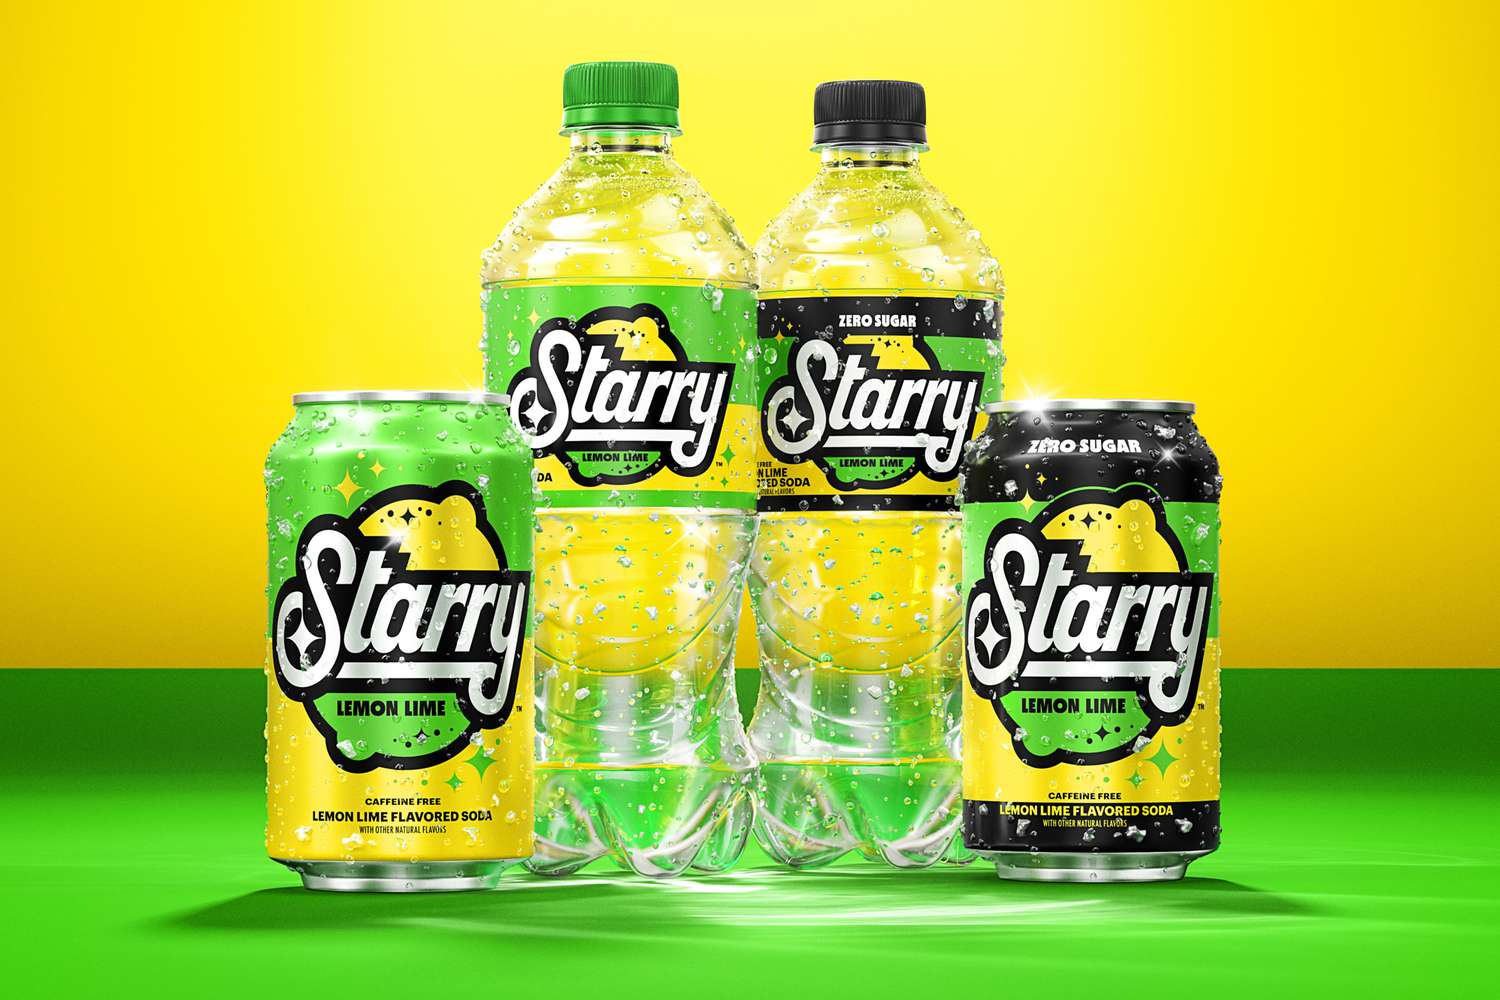 Sierra Mist: A Must-Try Soda for Every Quenched Thirst